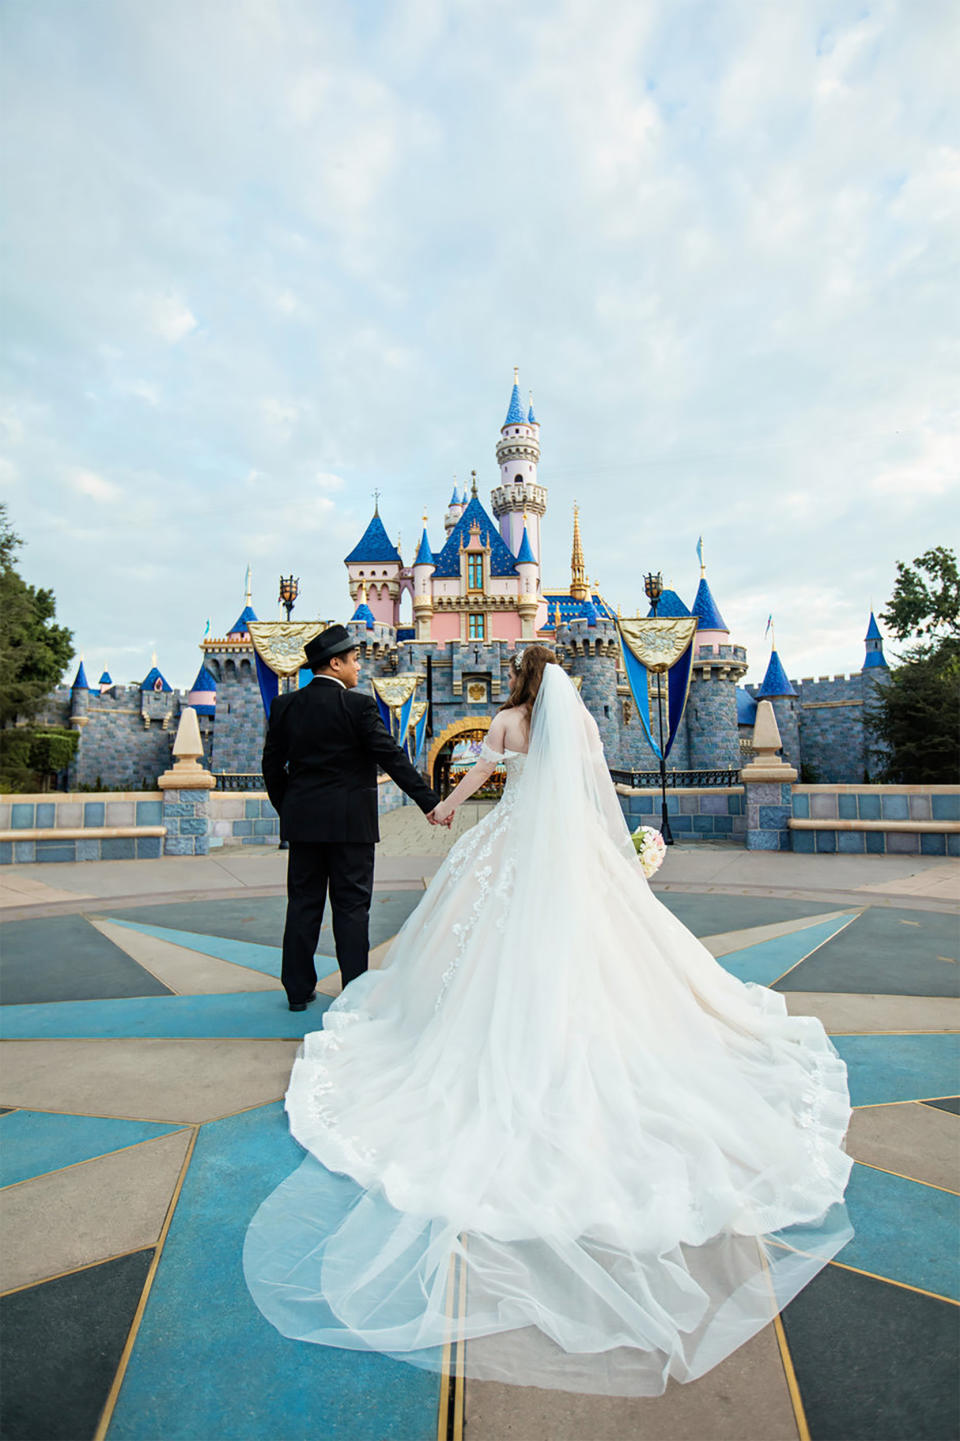 Shellie and her husband were first married at the Disneyland Resort in Anaheim, California, in 2016. (Photos by Jenna Henderson/White Rabbit Photo Boutique, Courtesy The Serial Bride)